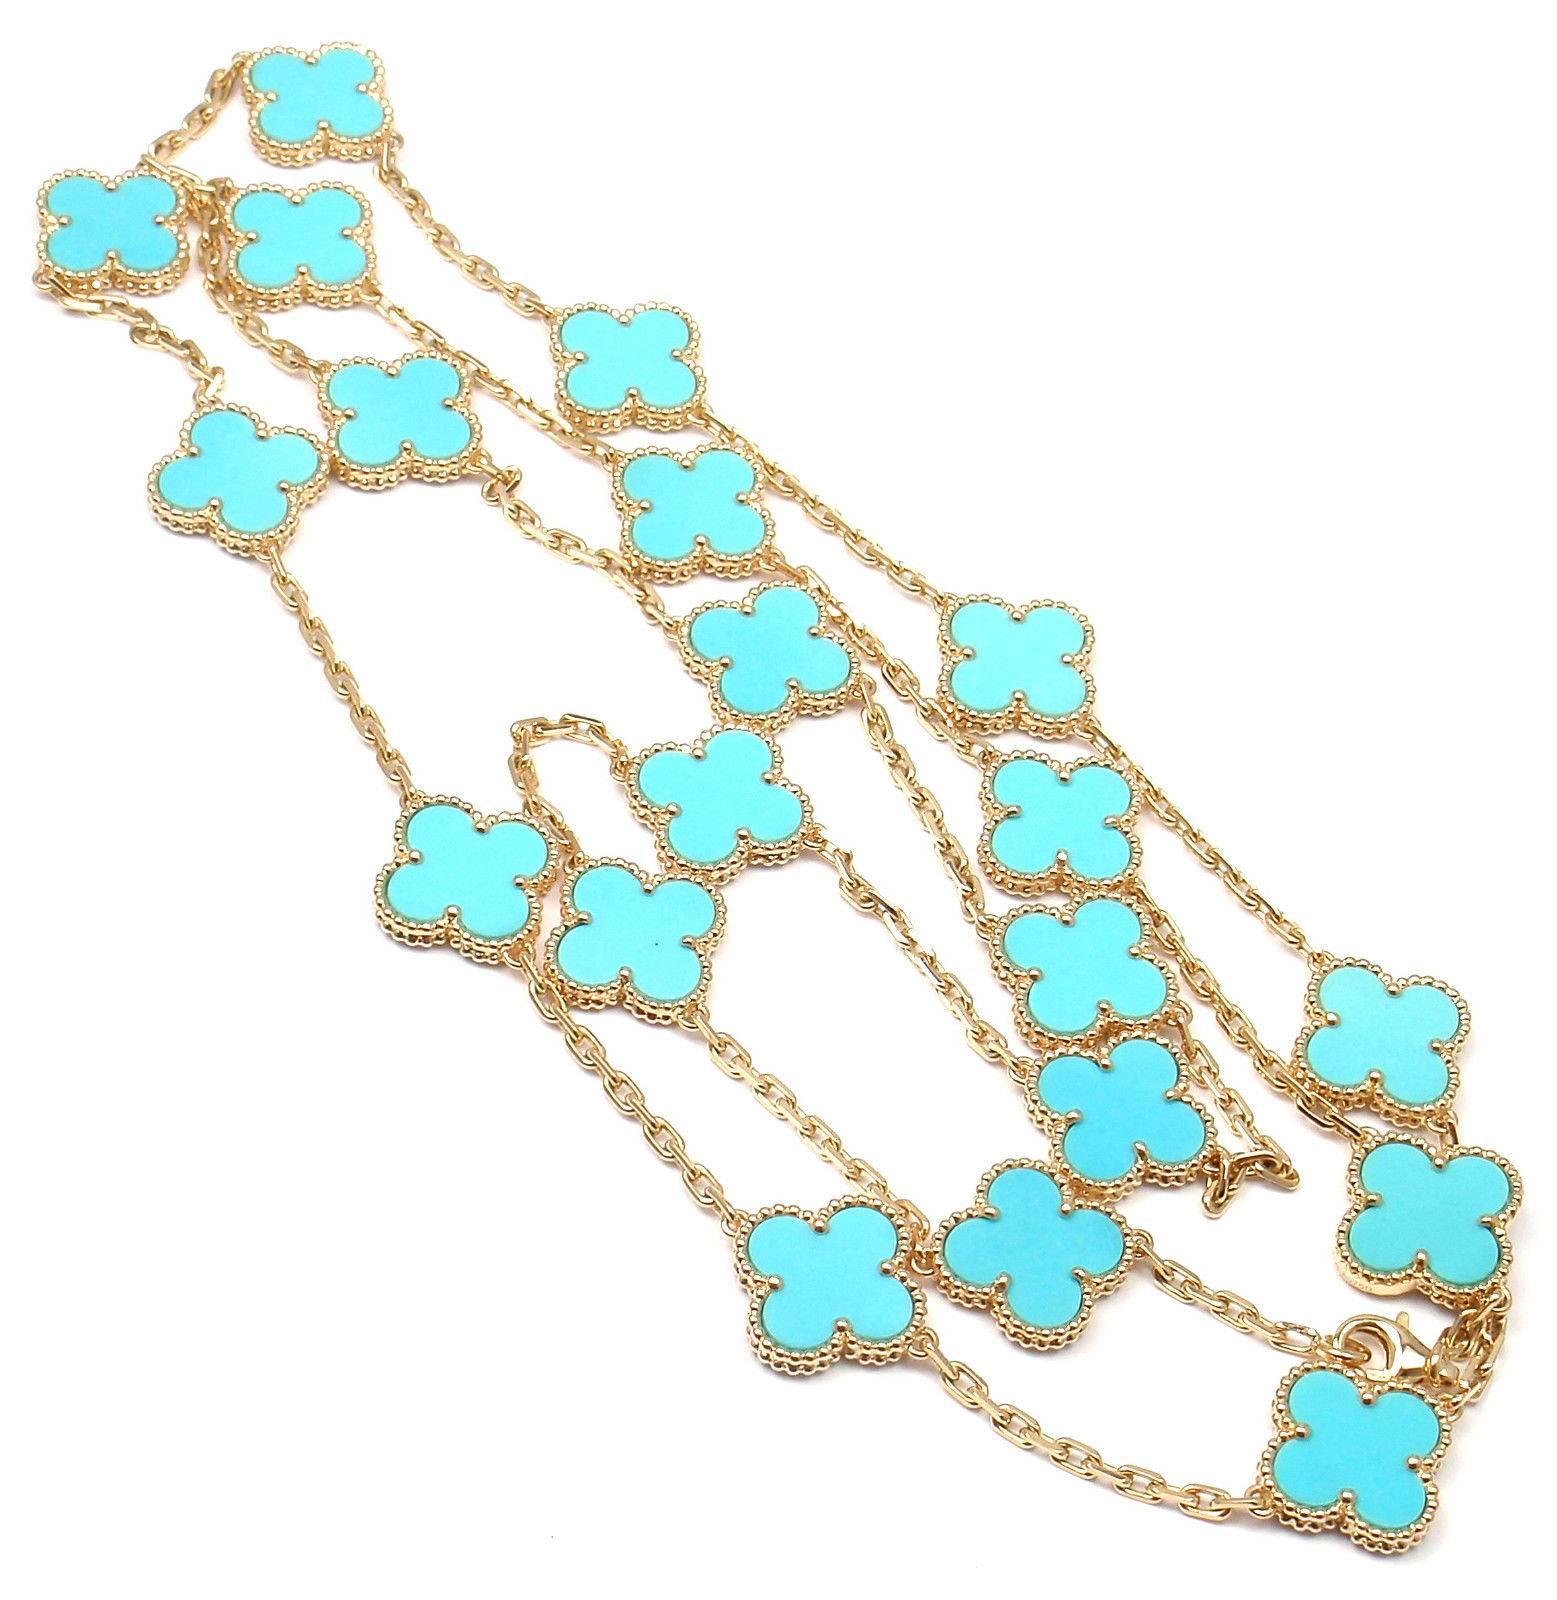 18k Yellow Gold Alhambra Twenty-Motif Turquoise Necklace by 
Van Cleef & Arpels, with 20 motifs of Turquoise Alhambra stones, 15mm each.

Details: 
Length: 33.5